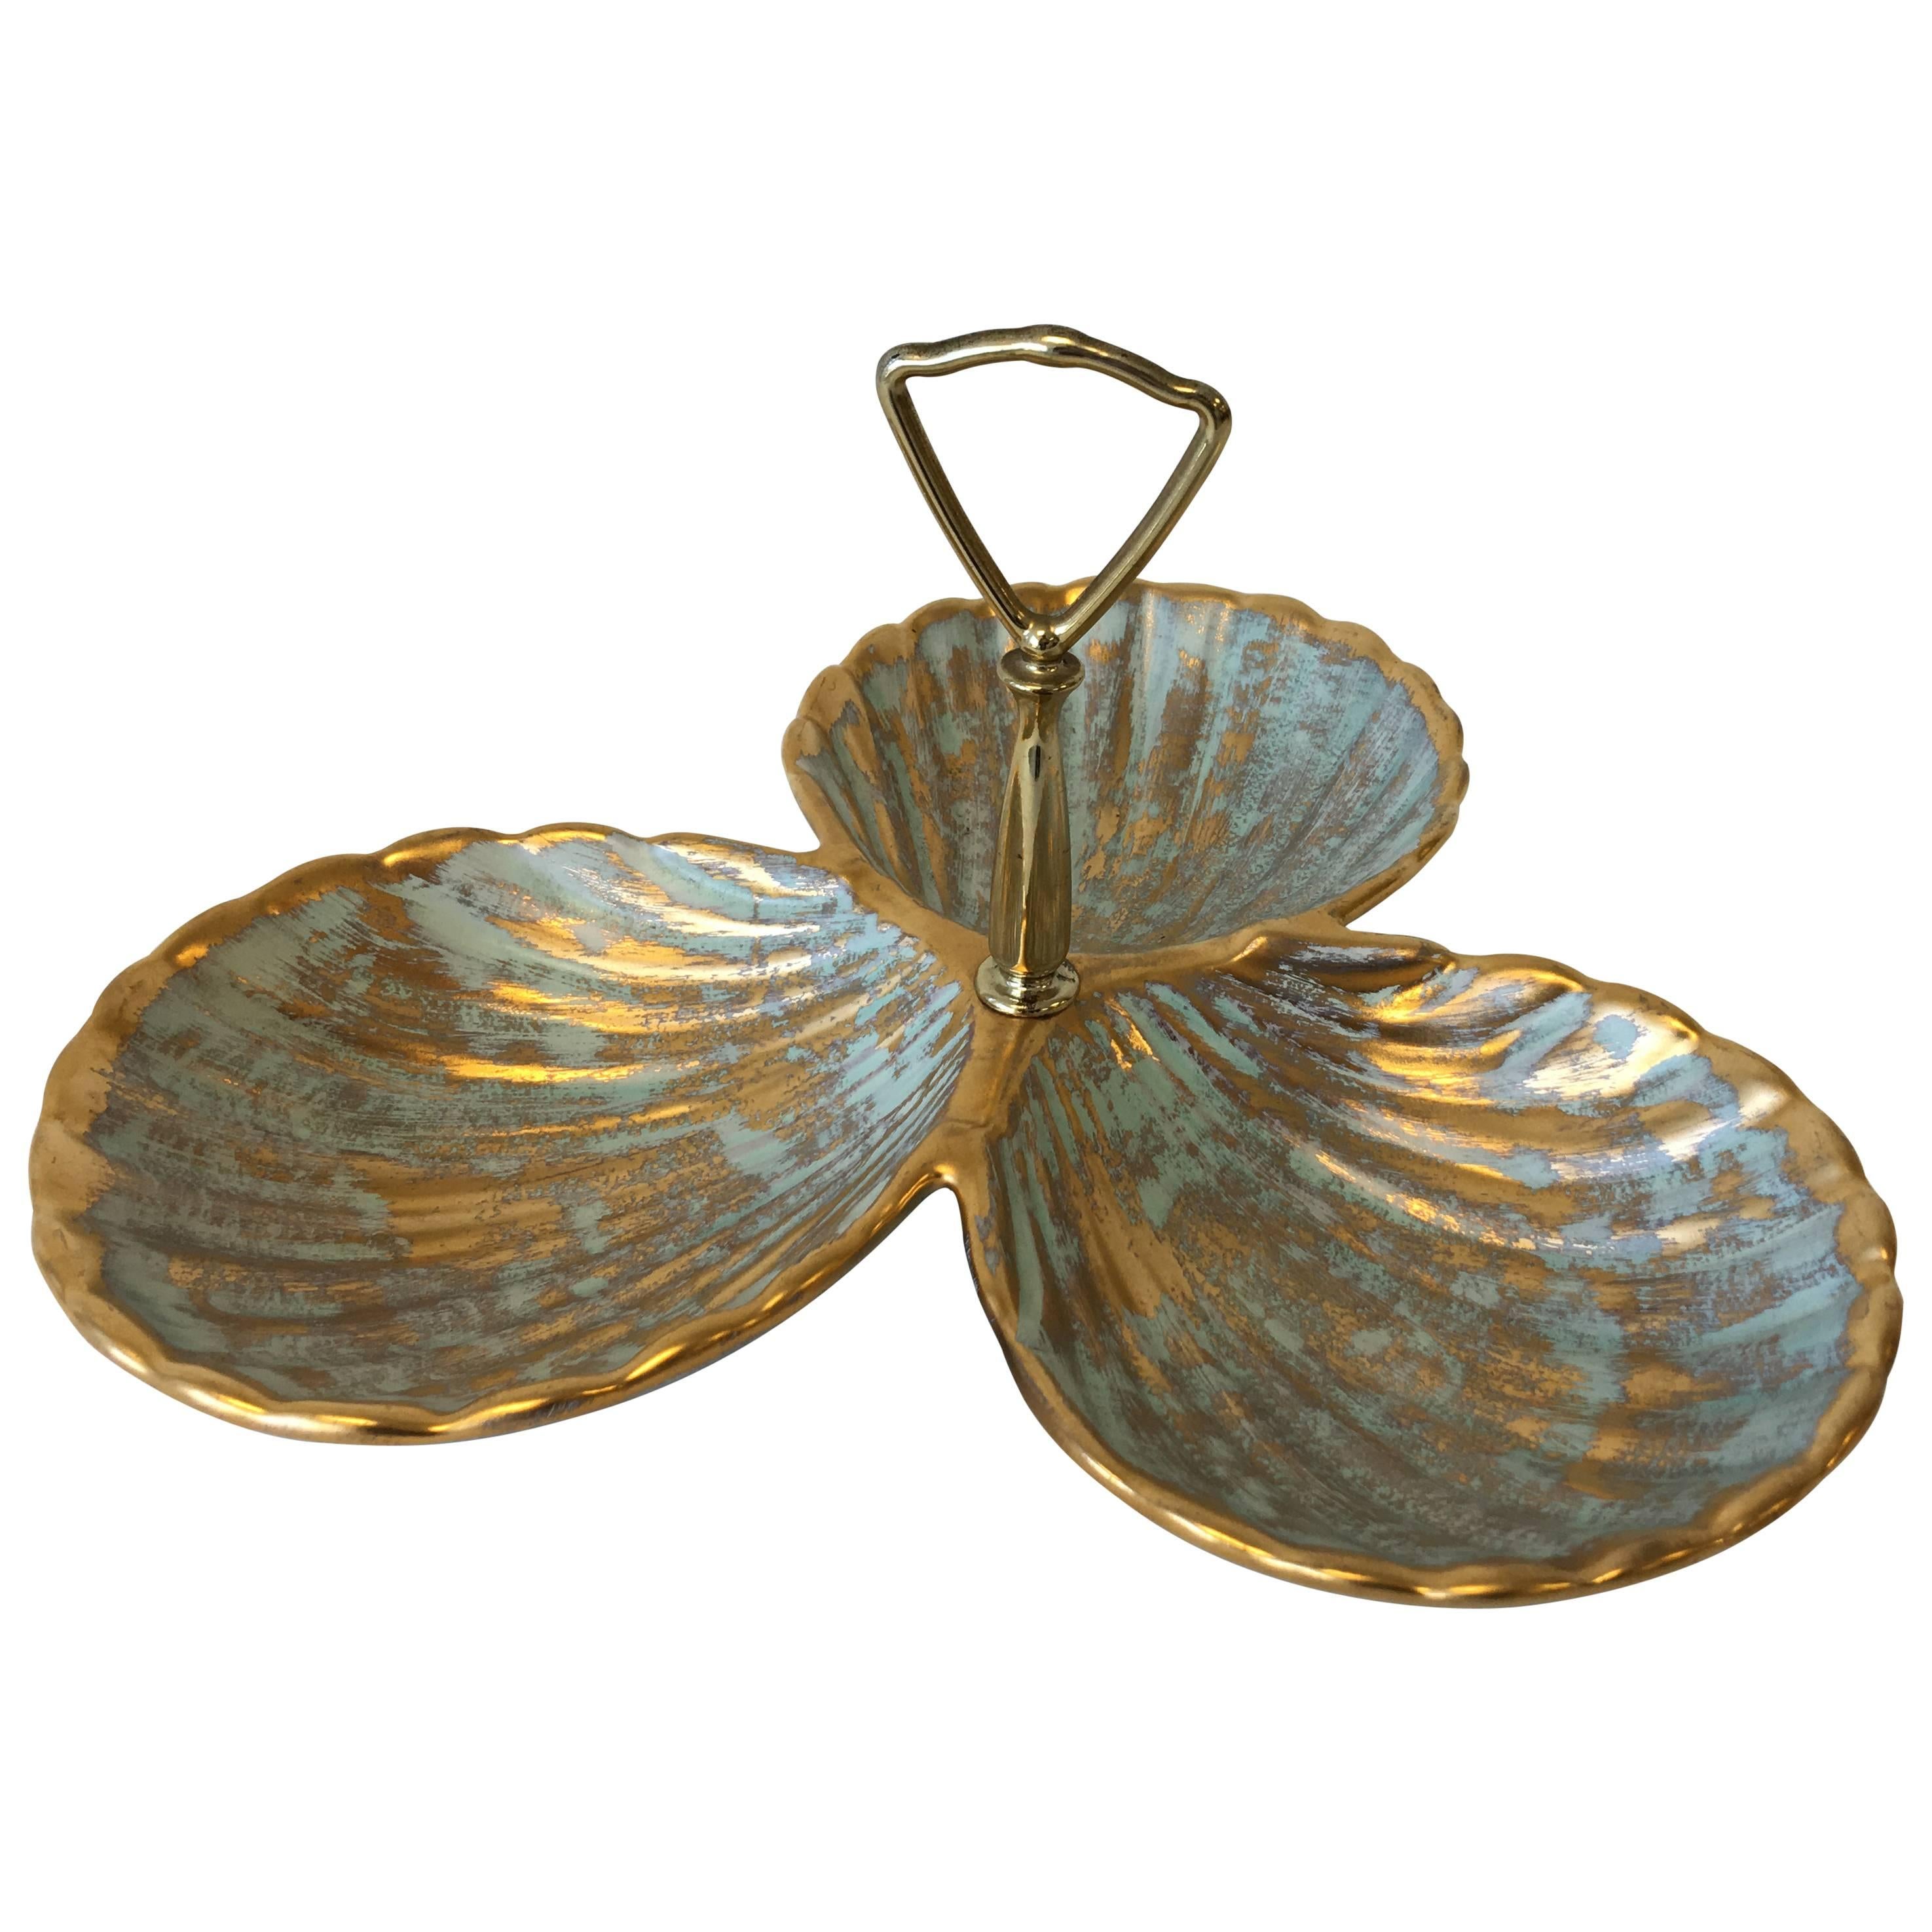 1970s Stangl Gold and Turquoise Seashell Serving Dish